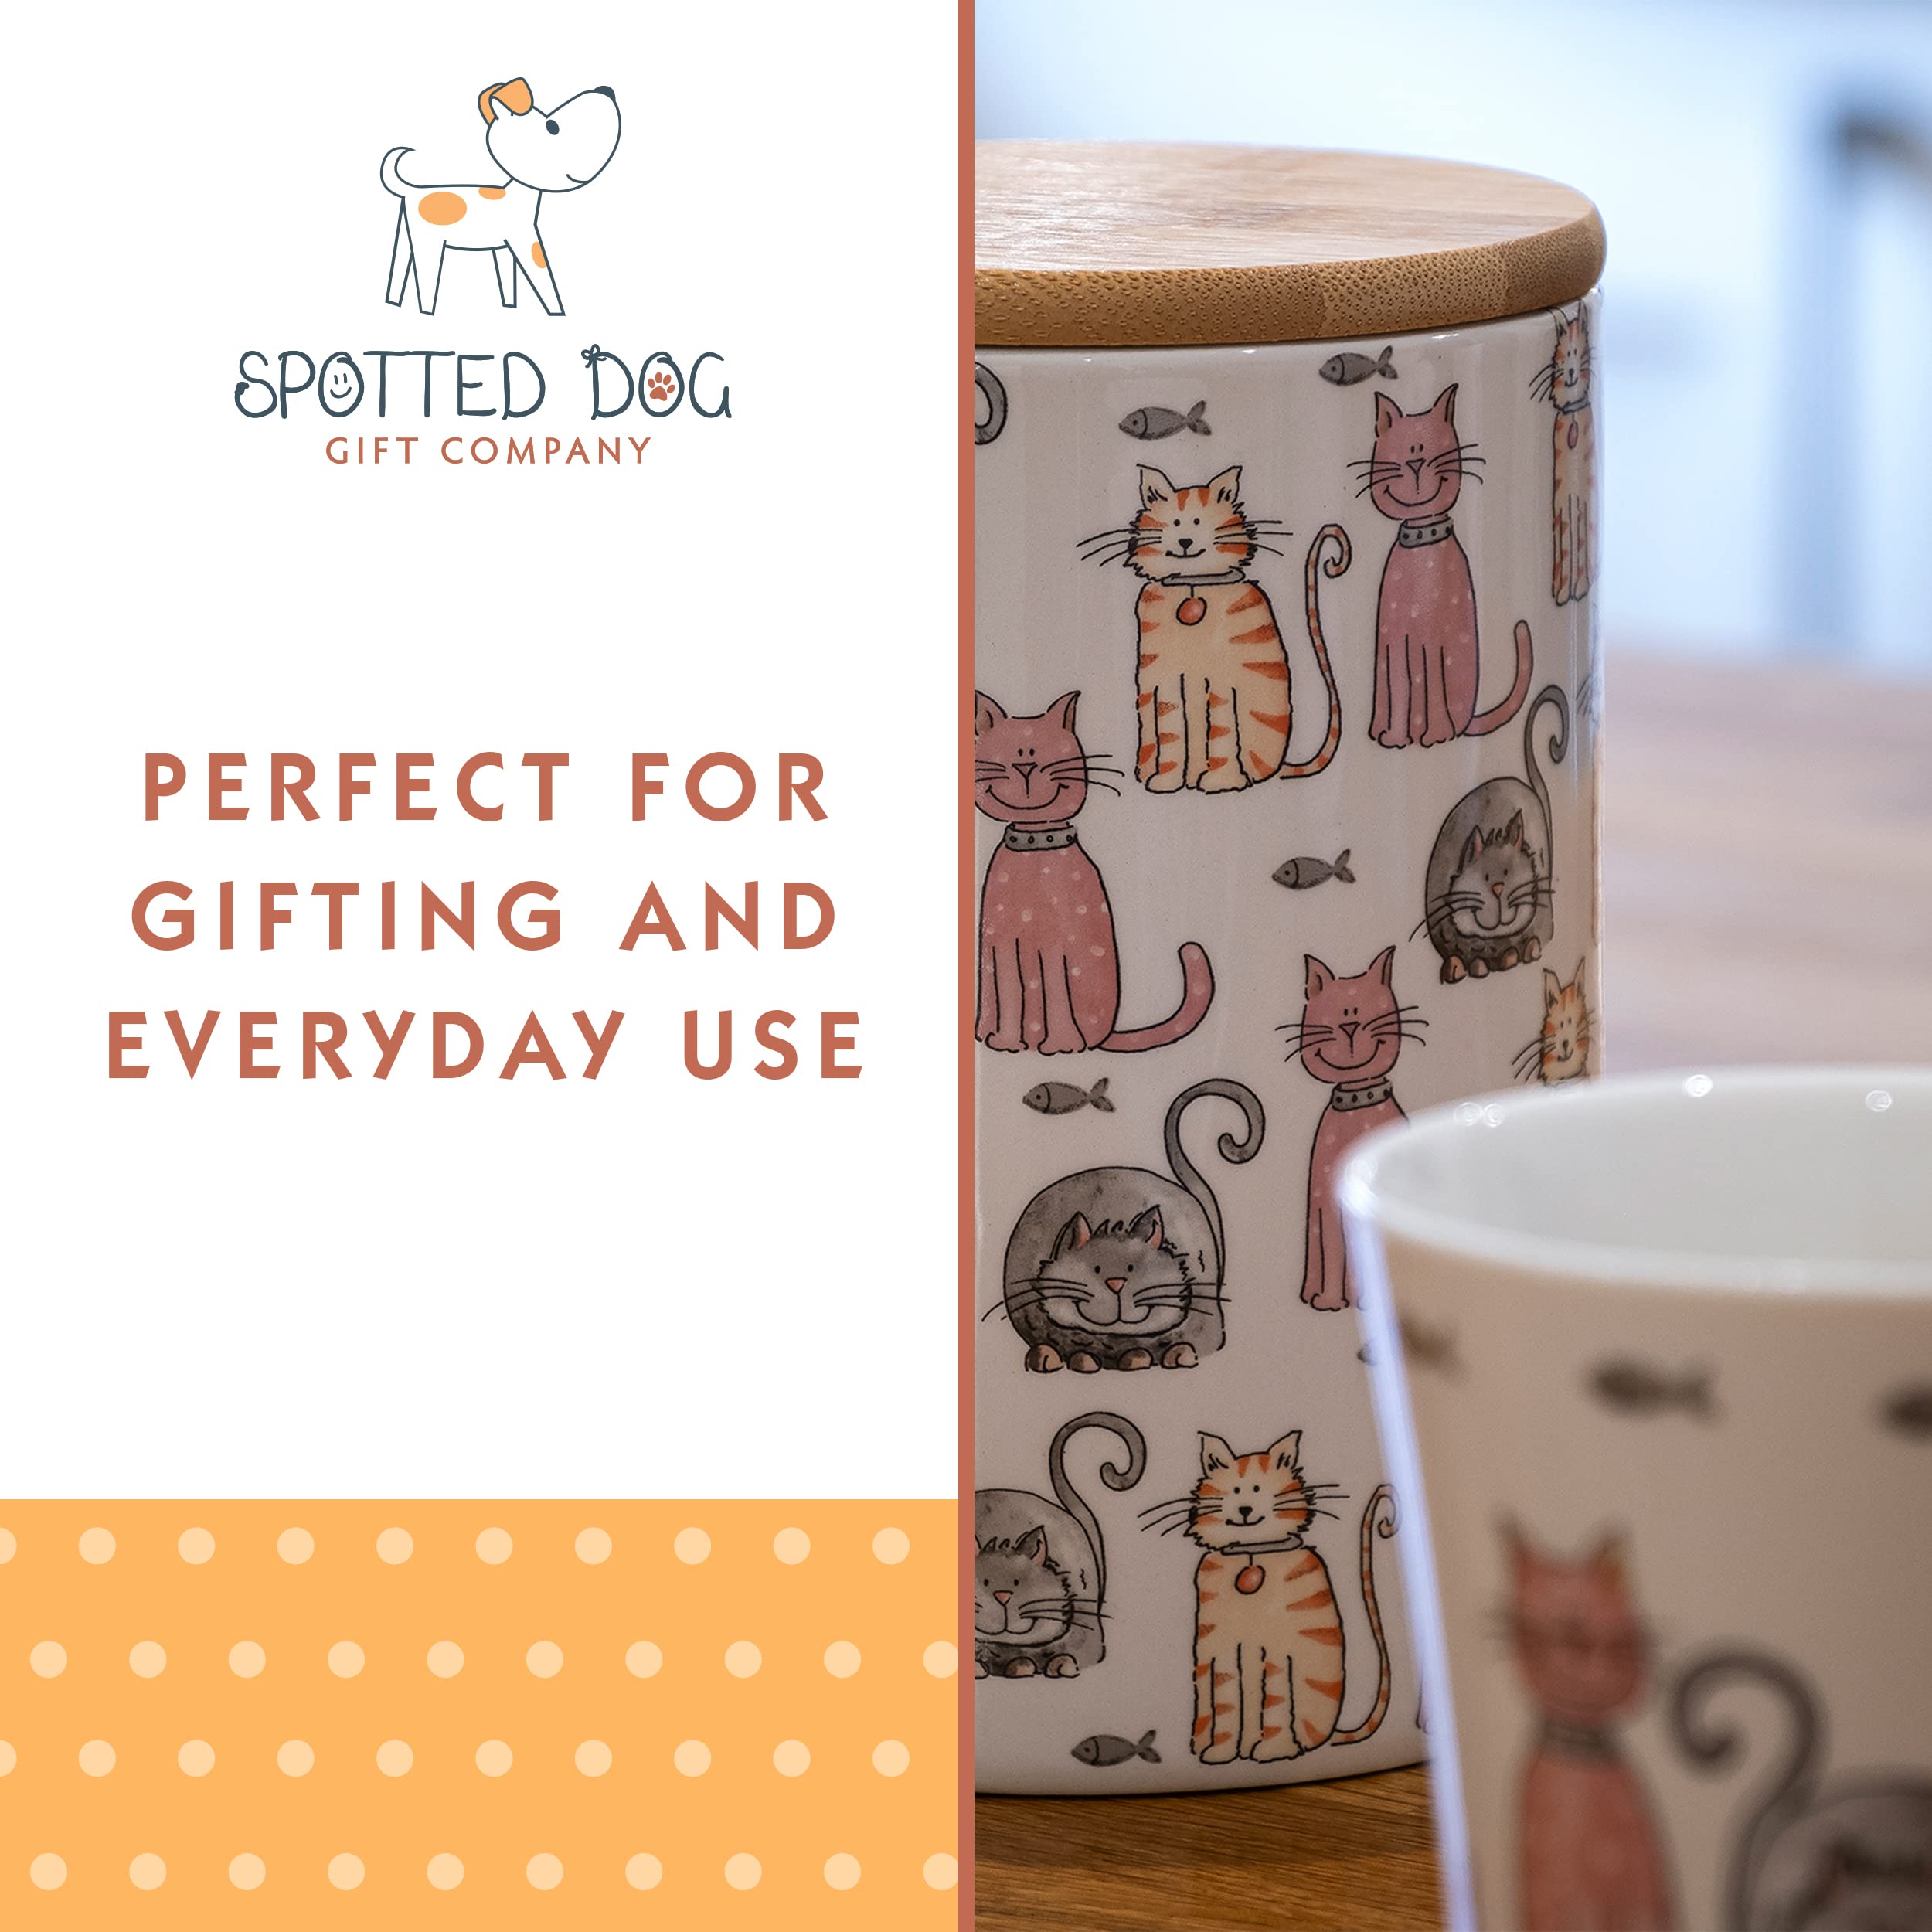 SPOTTED DOG GIFT COMPANY Cat Mugs, Cat Coffee Mug Set, 12 oz Cute Ceramic Porcelain China Coffee Tea Mugs Cups, Happy Cats Themed Gifts for Cat Lovers and Animal Lovers Women Men, Set of 2